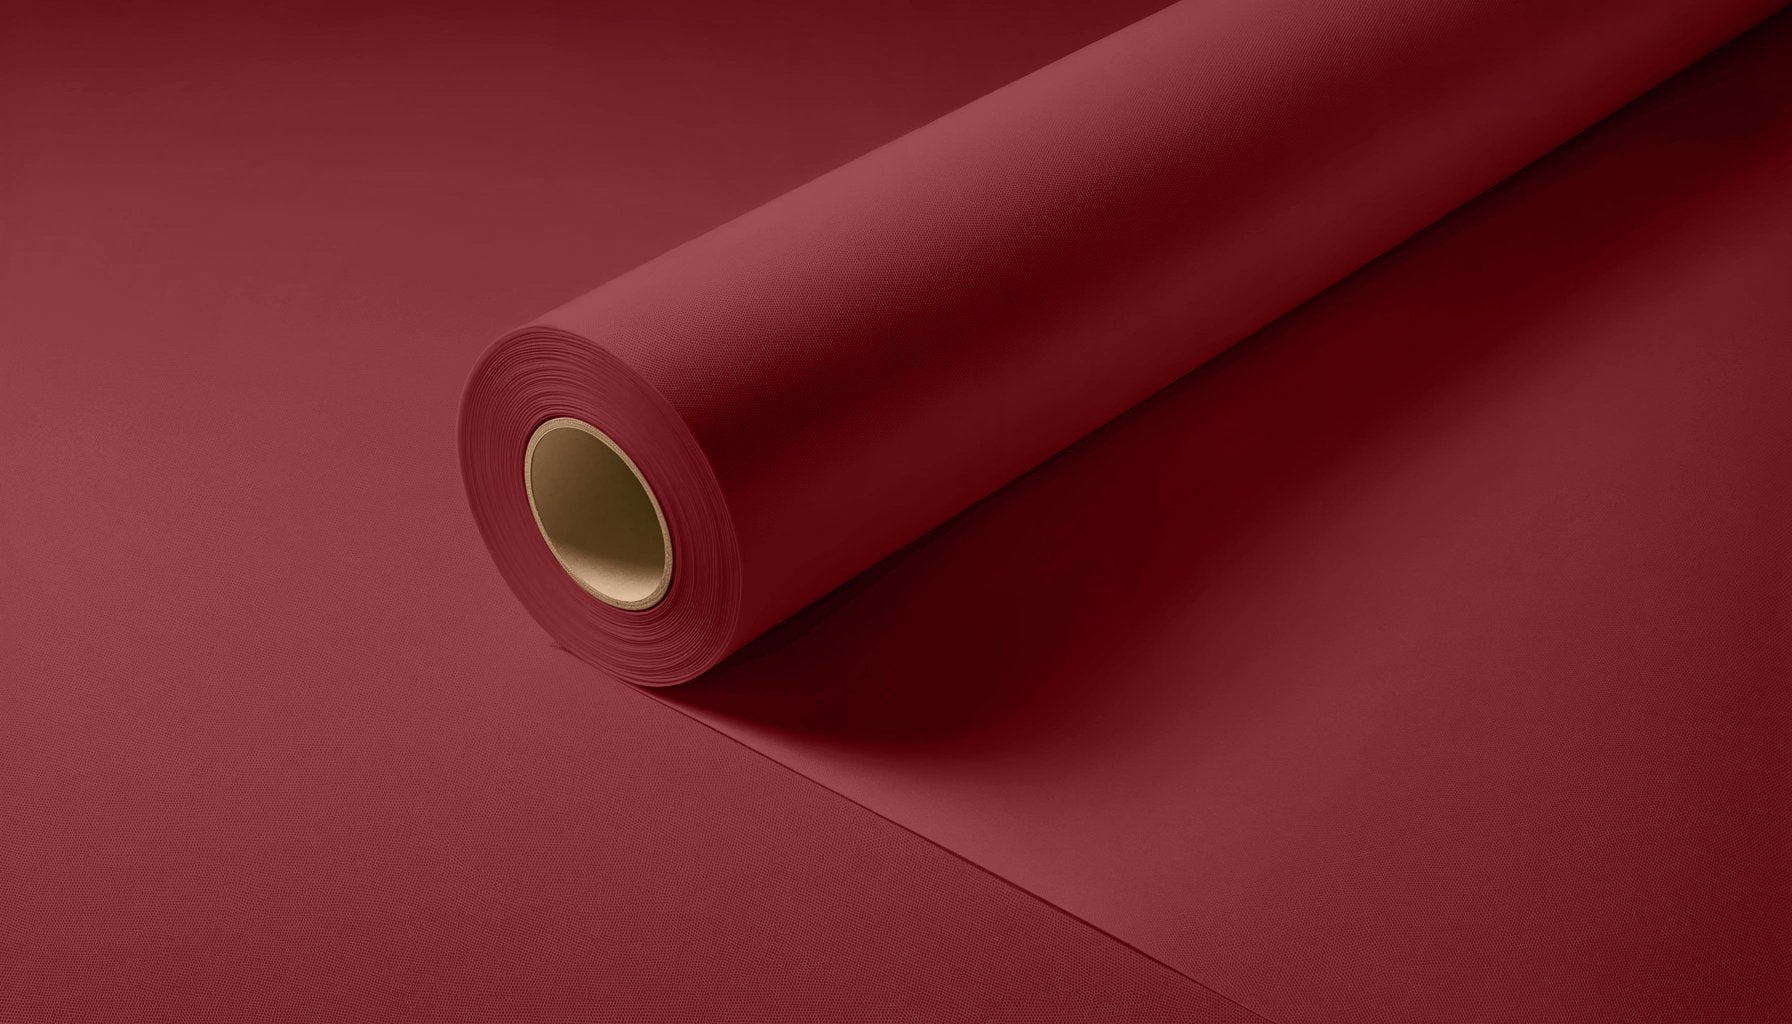 Peel & Stick Removable Re-usable Paint - Color RAL 3032 Pearl Ruby Red - offRAL™ - RALRAW LLC, USA